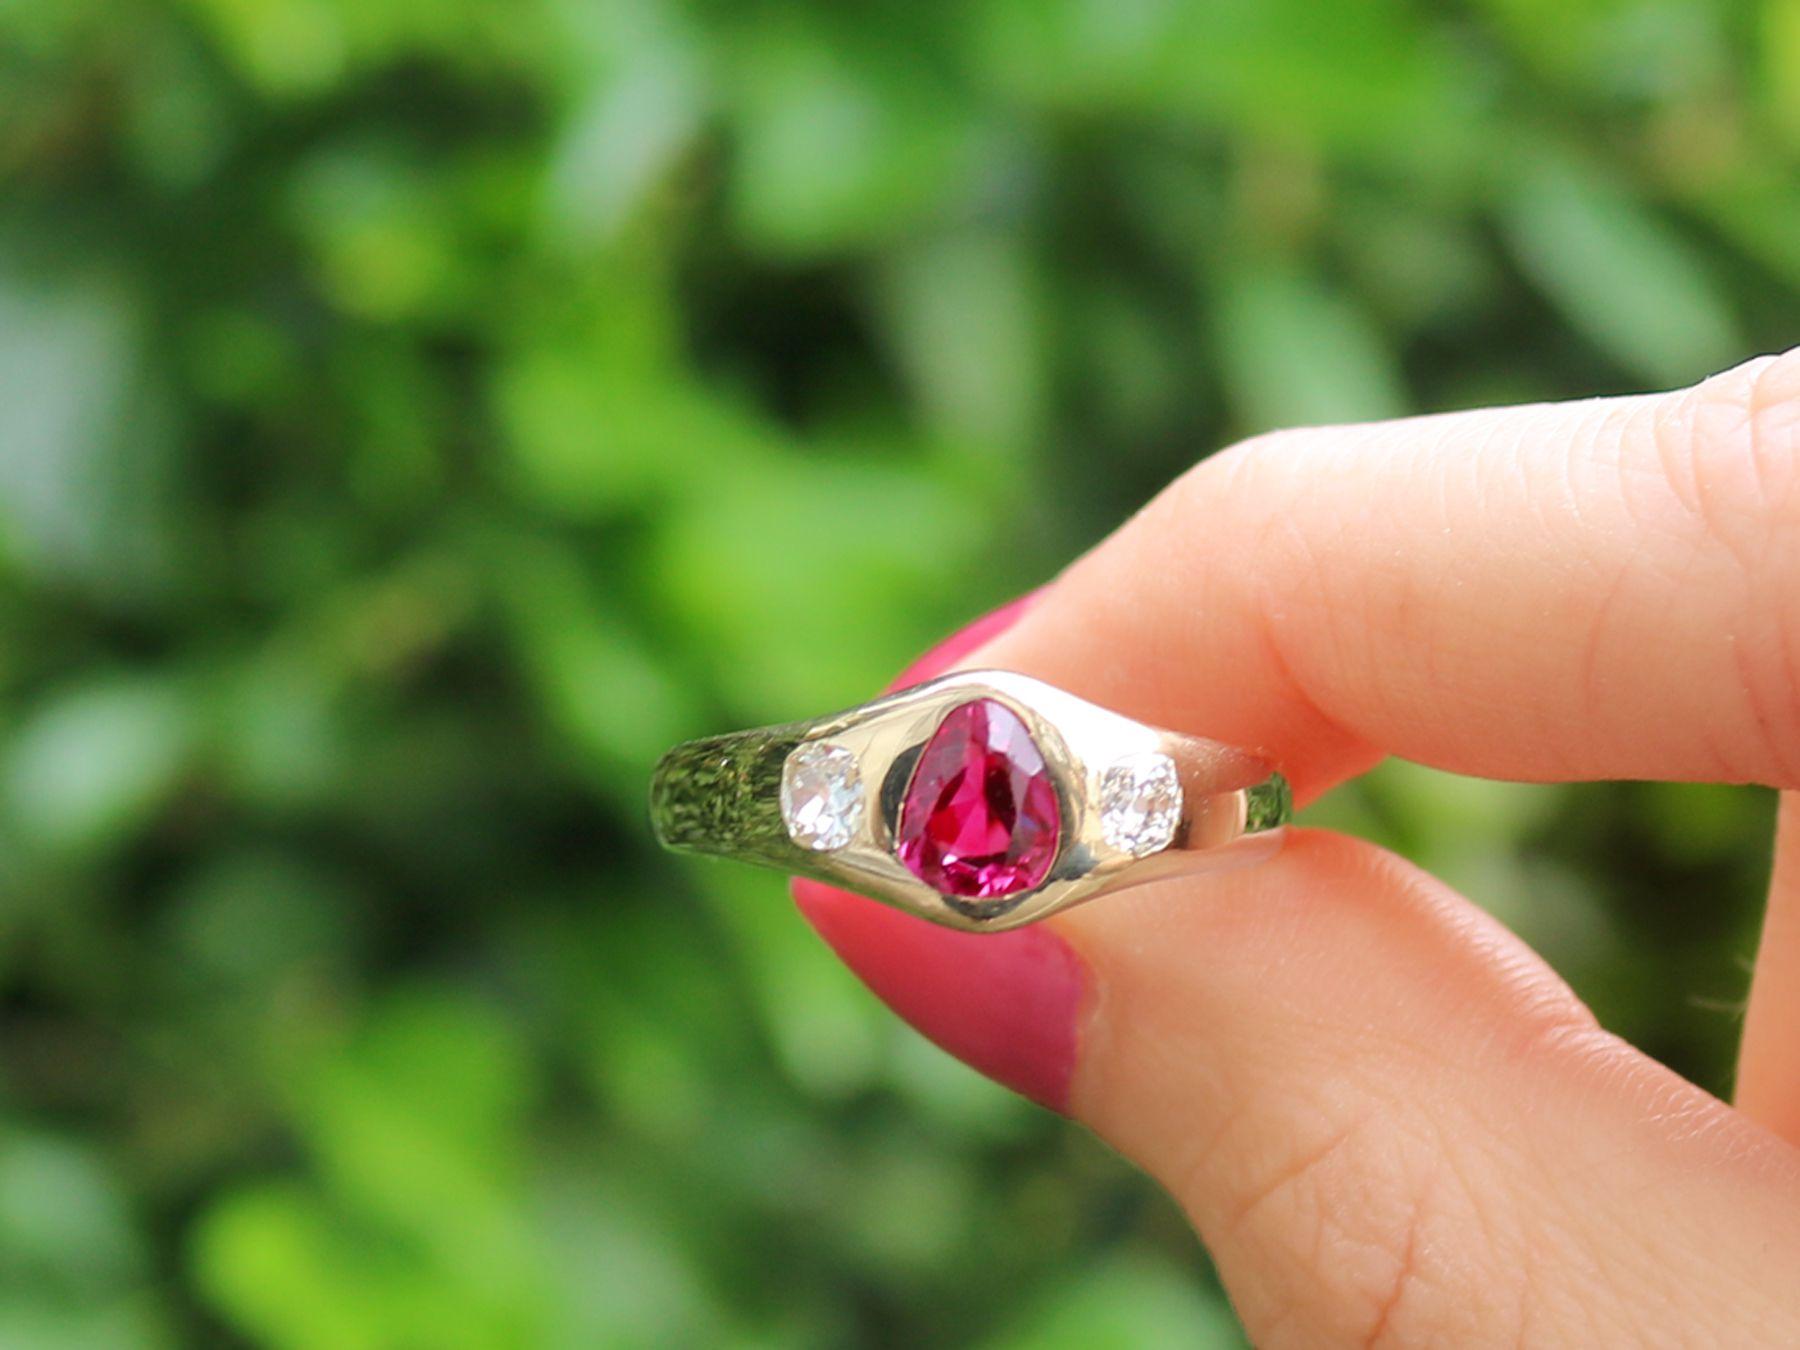 A stunning, fine and impressive antique 0.83 carat ruby and 0.40 carat diamond, 18 karat yellow gold dress ring; part of our diverse antique jewelry and estate jewelry collections.

This fine and impressive antique ruby and diamond ring has been